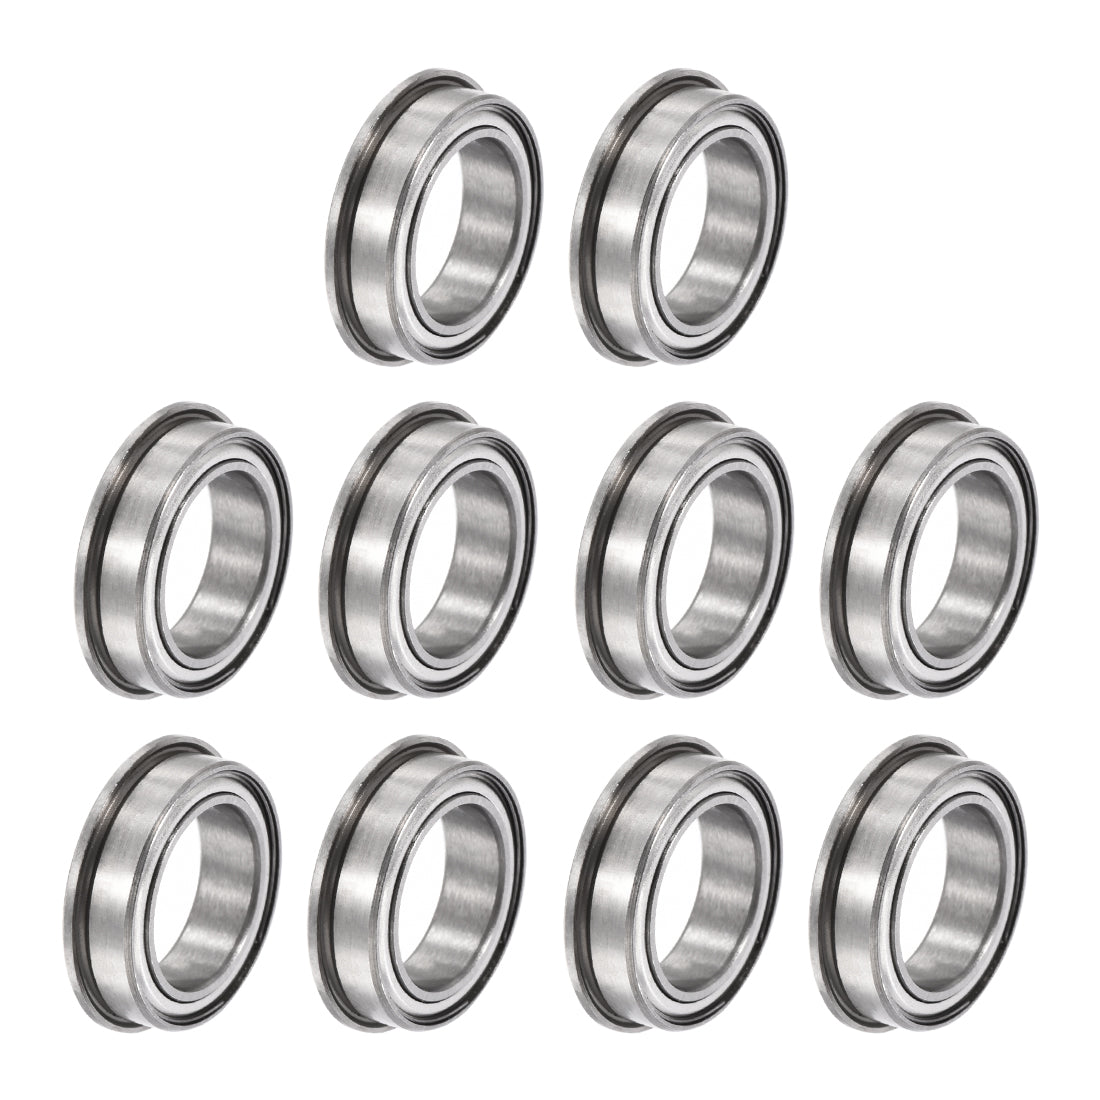 uxcell Uxcell F6700ZZ Flange Ball Bearing 10mmx15mmx4mm Double Metal Shielded (GCr15) Chrome Steel Bearings 10pcs